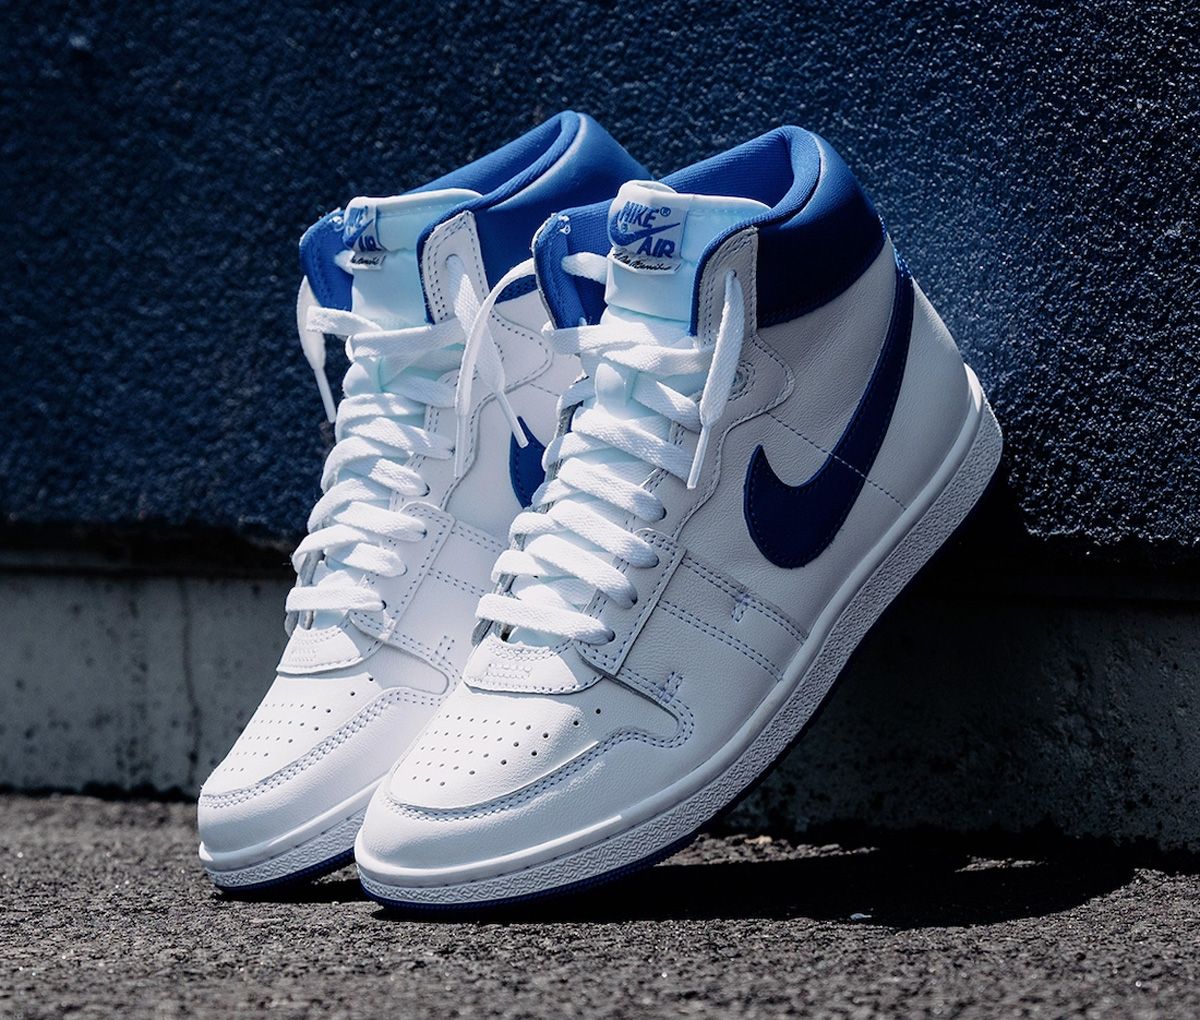 Saga Surrey Soberano A Ma Maniére x Nike Air Ship “Game Royal” is Limited to Just 2,300 Pairs |  HOUSE OF HEAT